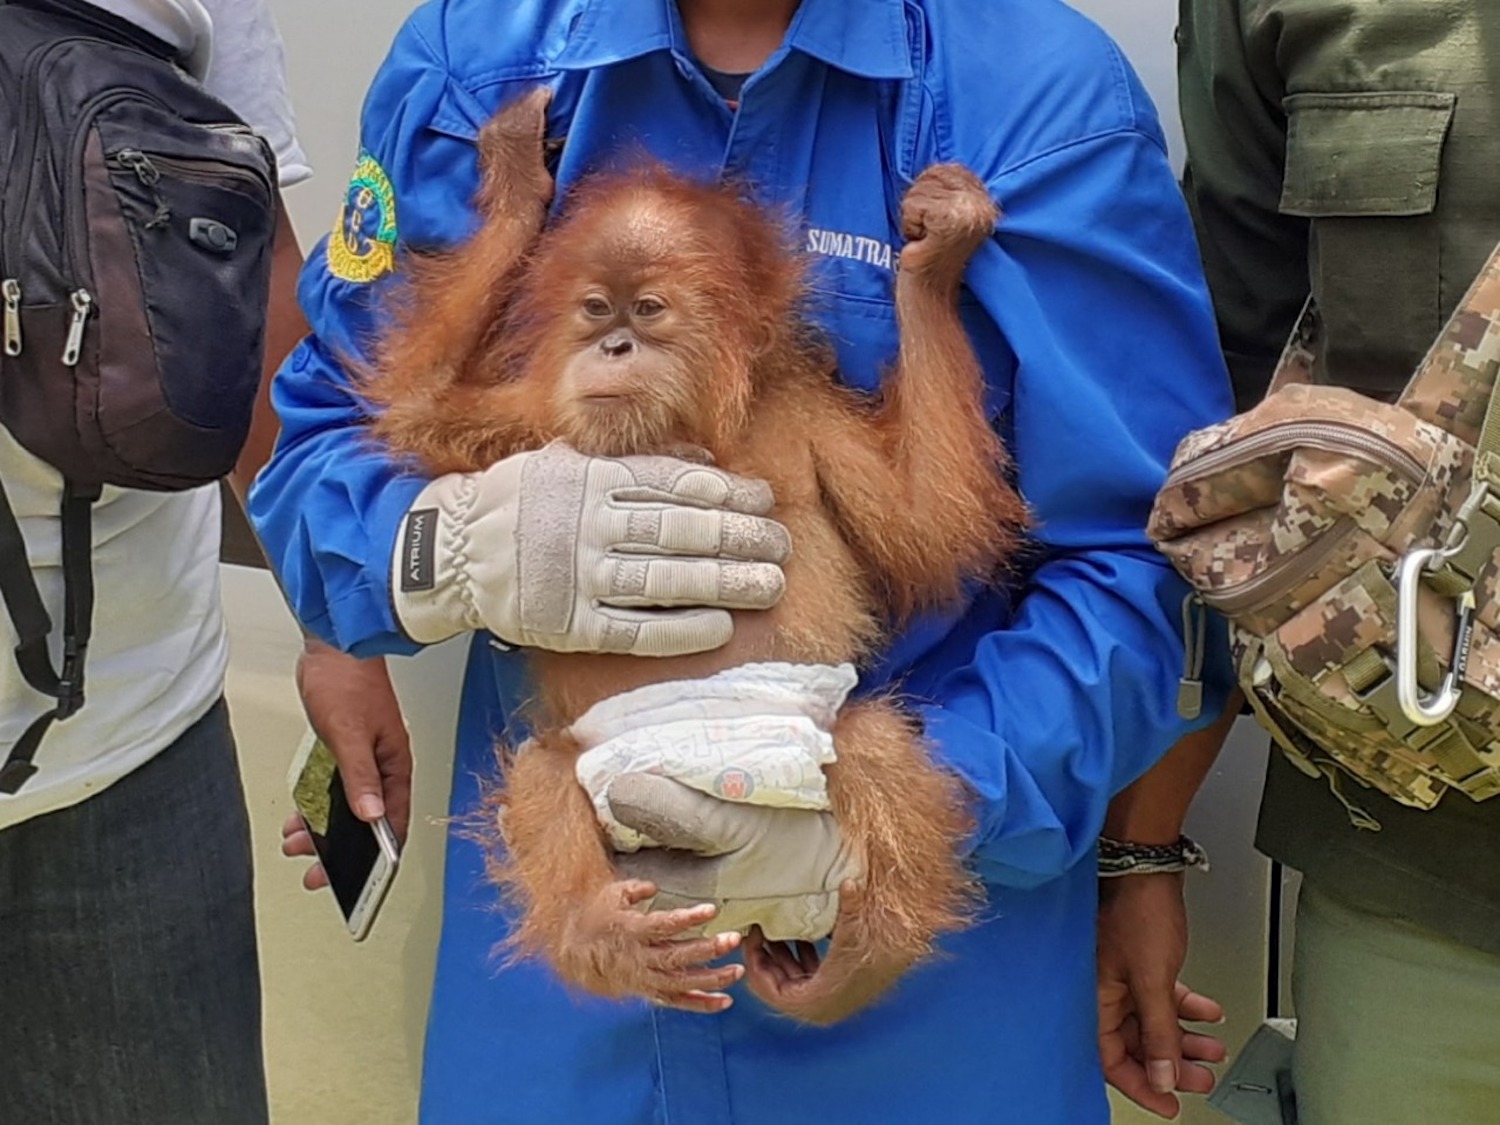 This Is How Severely Endangered Orangutans Are Trafficked, Per a Outdated Unlawful Trader